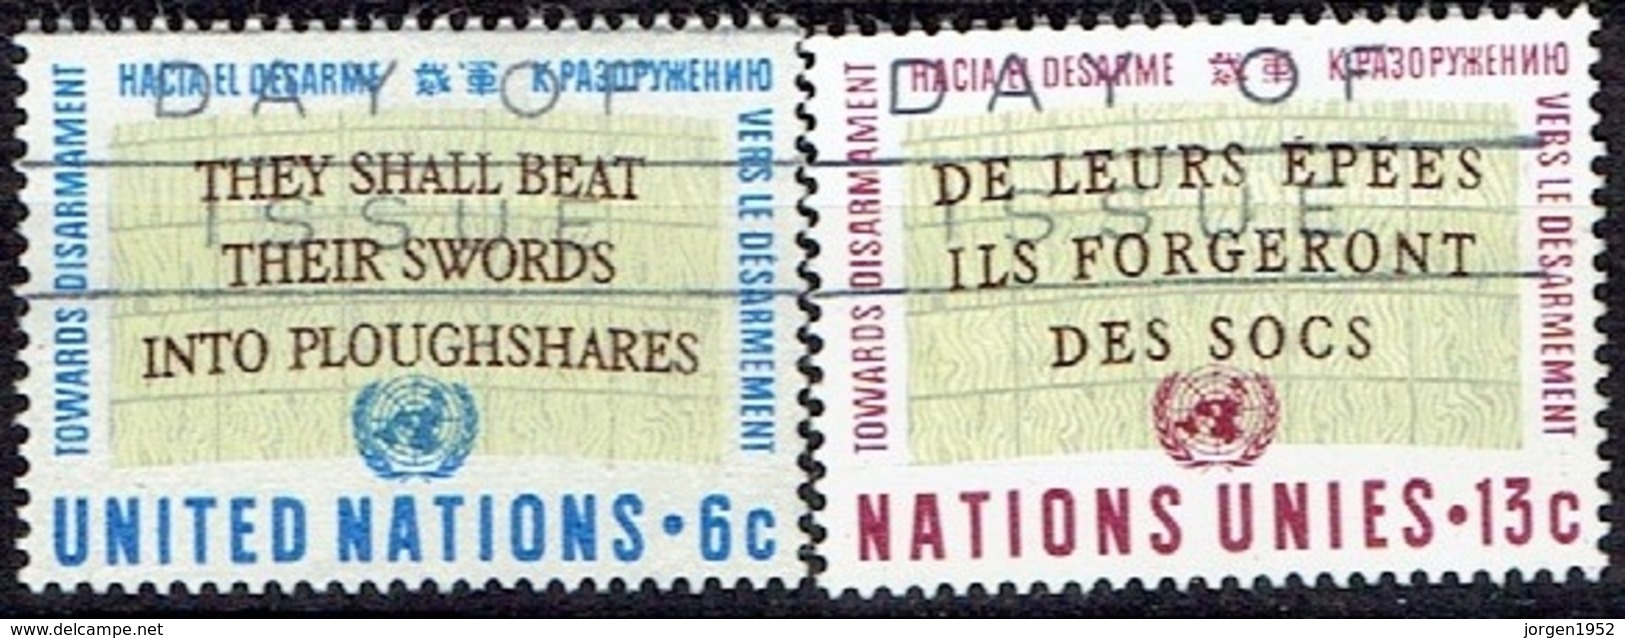 UNITED NATIONS # NEW YORK FROM 1967 STAMPWORLD 187-88 - Oblitérés